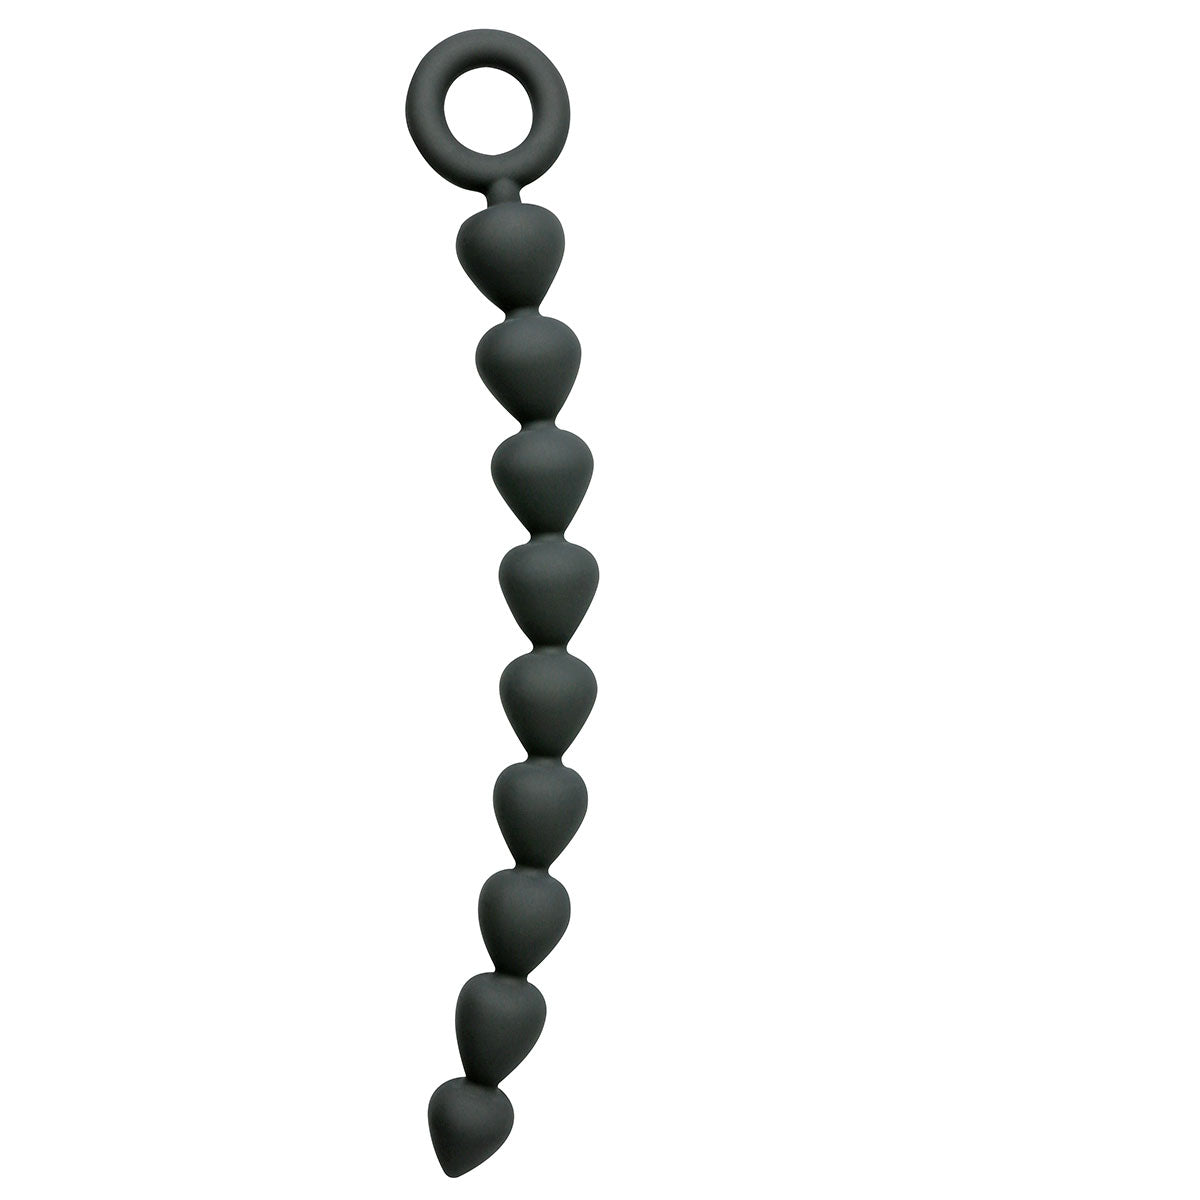 Black Silicone Anal Beads